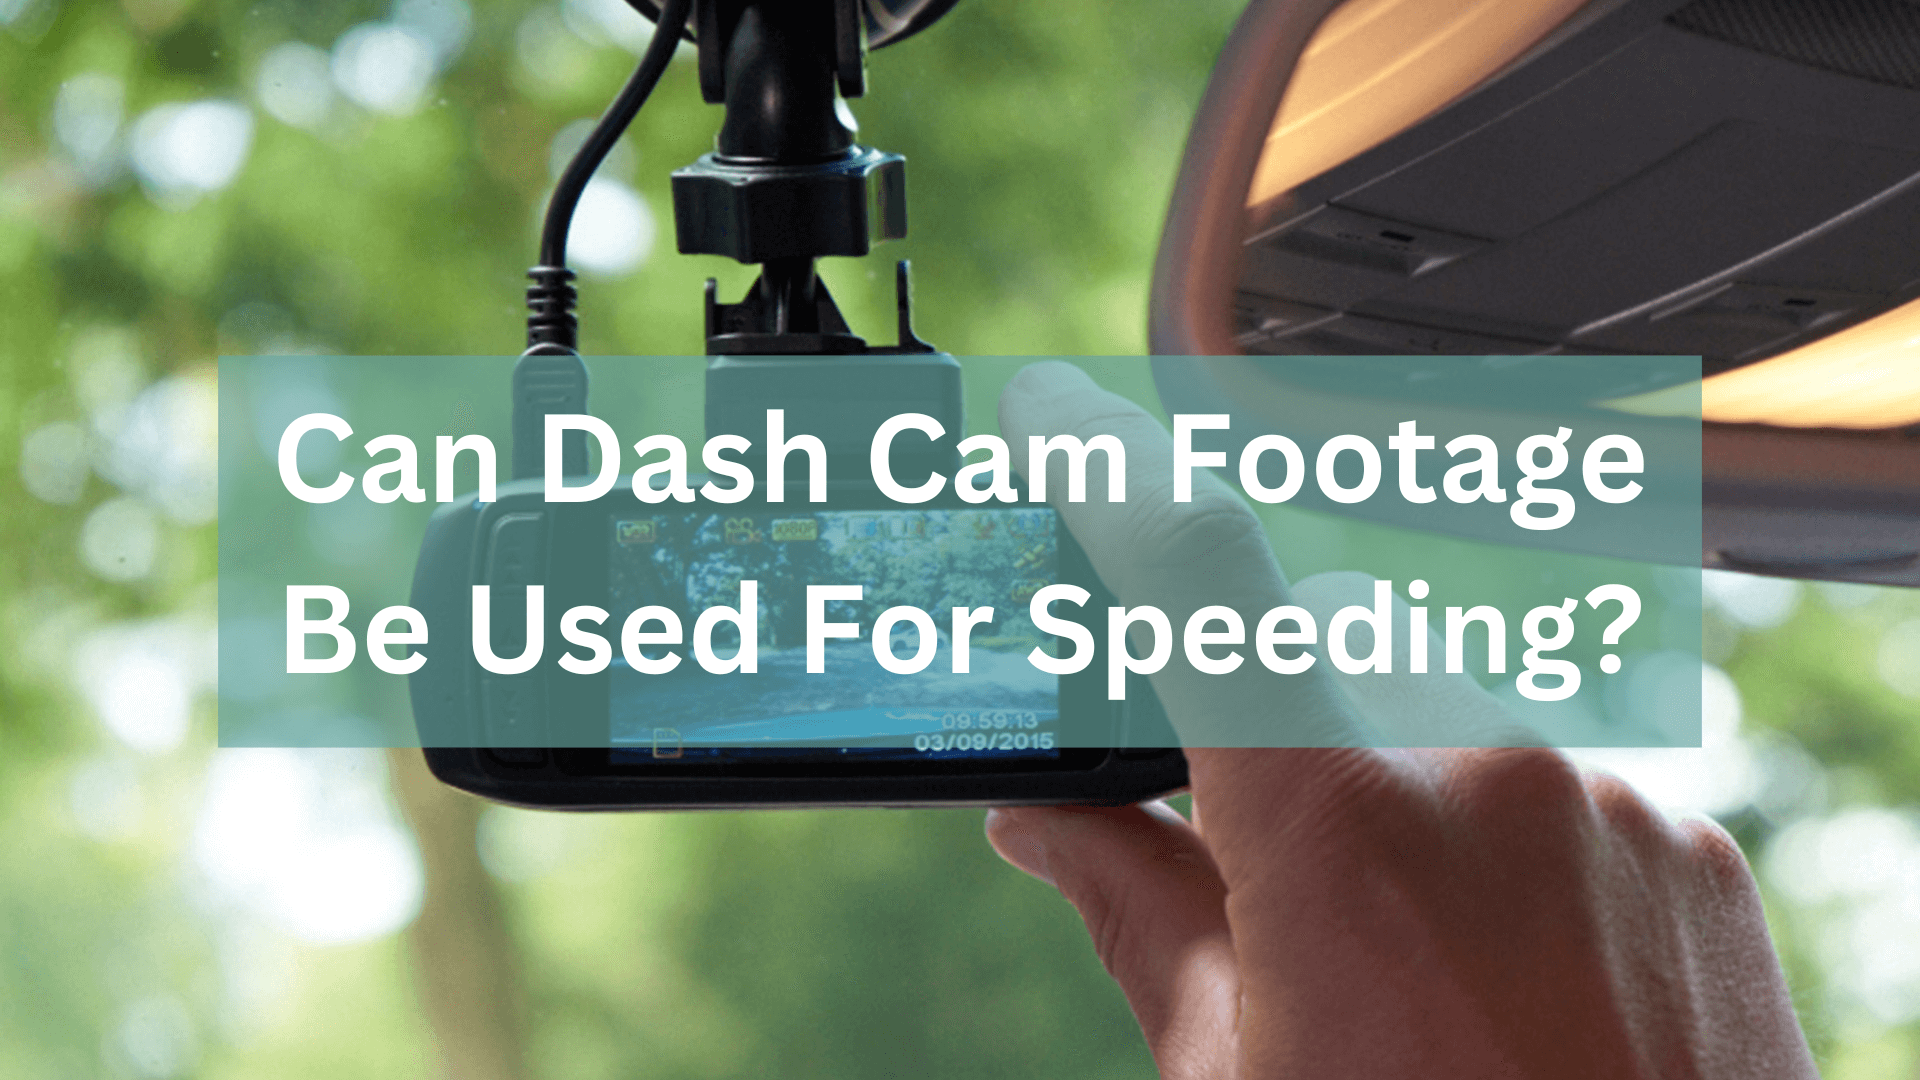 Should You Use Your Phone As A Dashcam? 